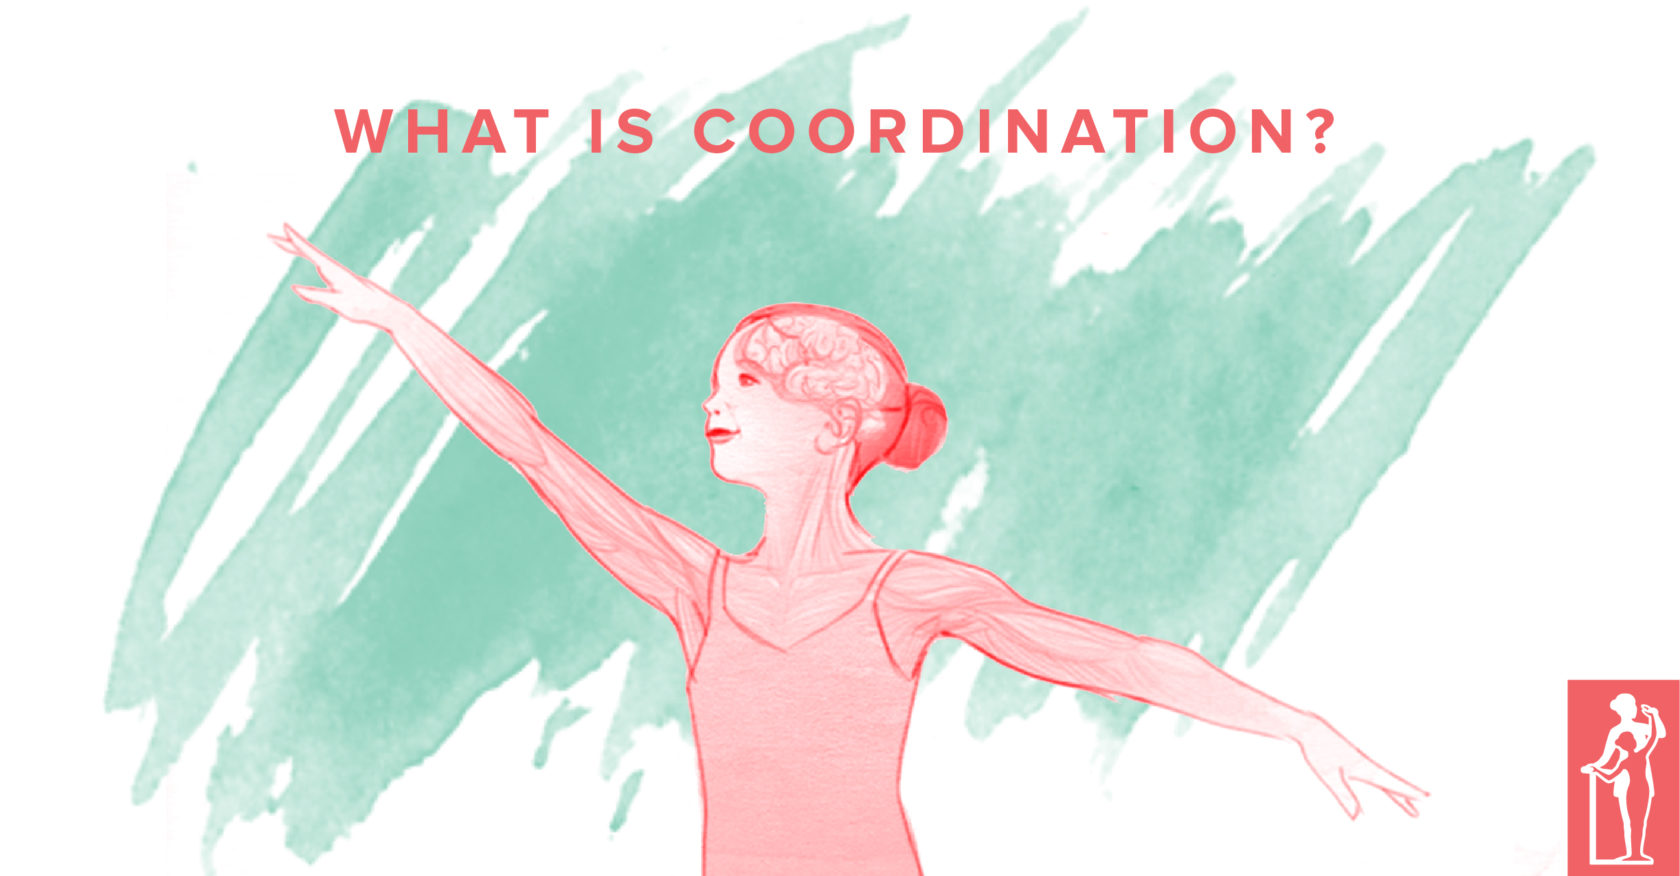 What is Coordination?